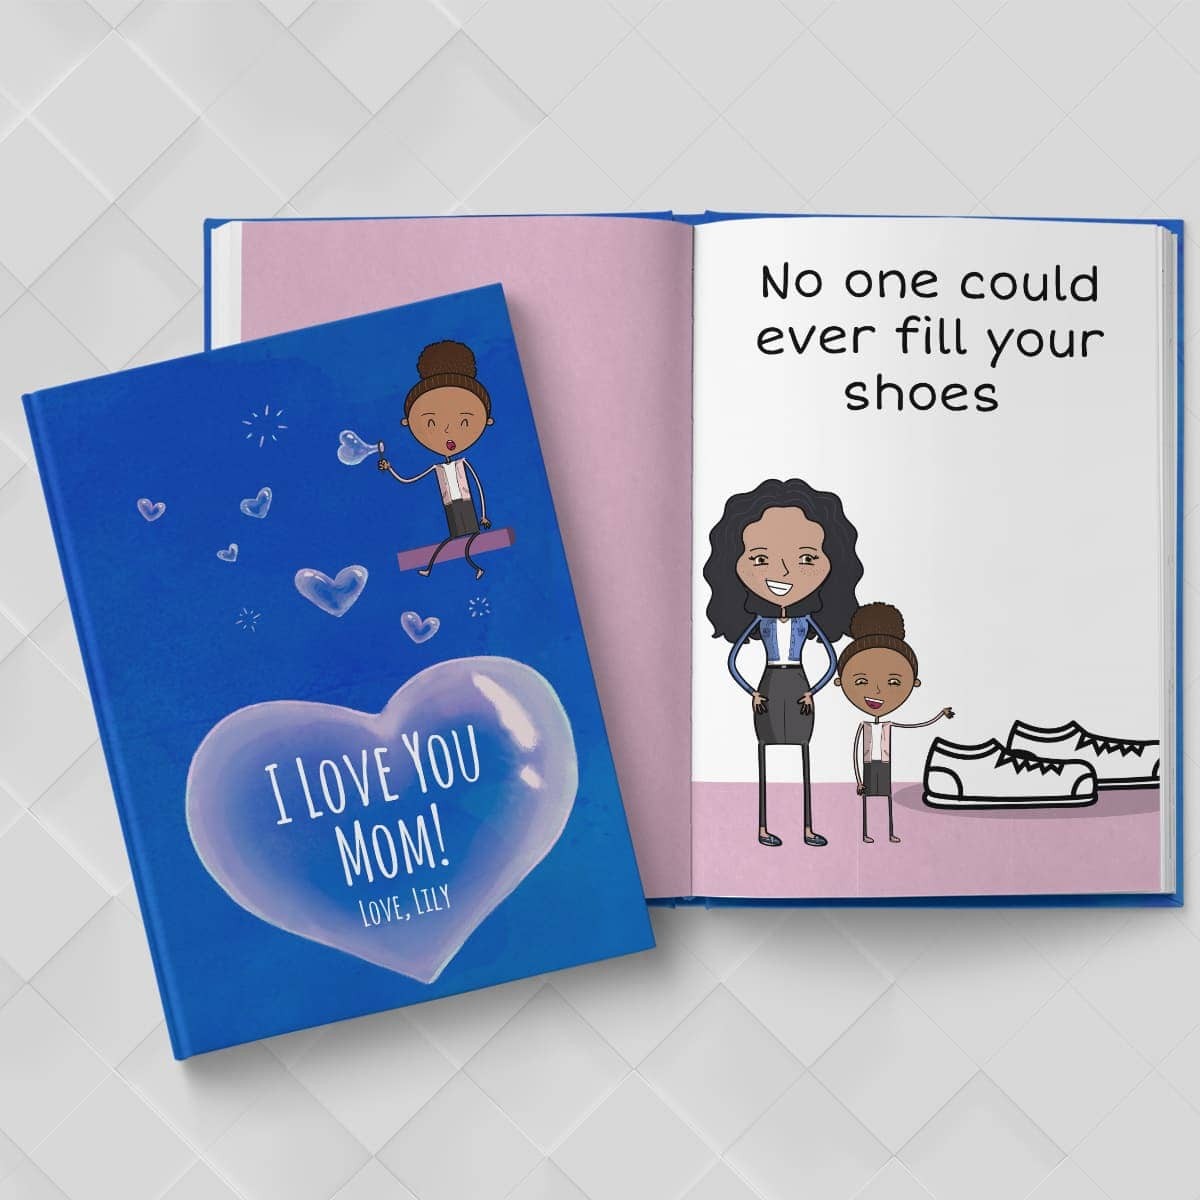 Say “I Love You” With LoveBook